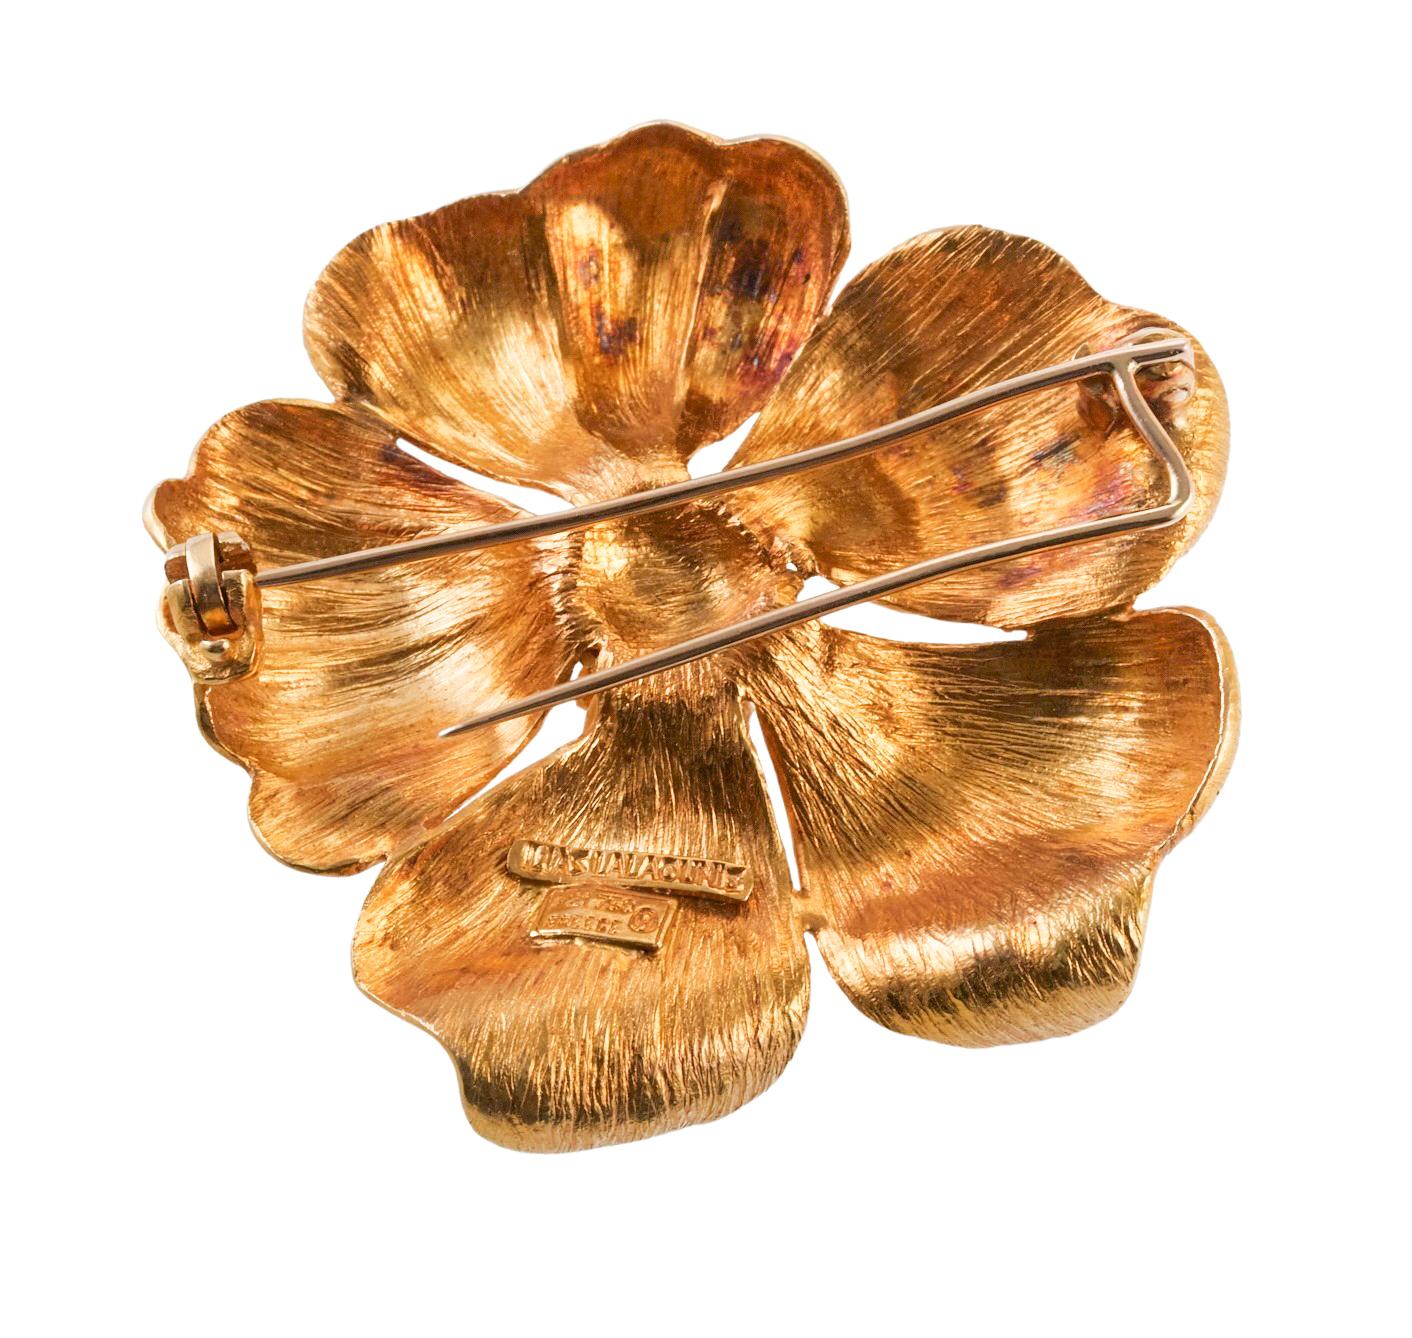 18k yellow gold brooch by Ilias Lalaounis of Greece, depicting a five petal wild rose. Brooch measures 1.75